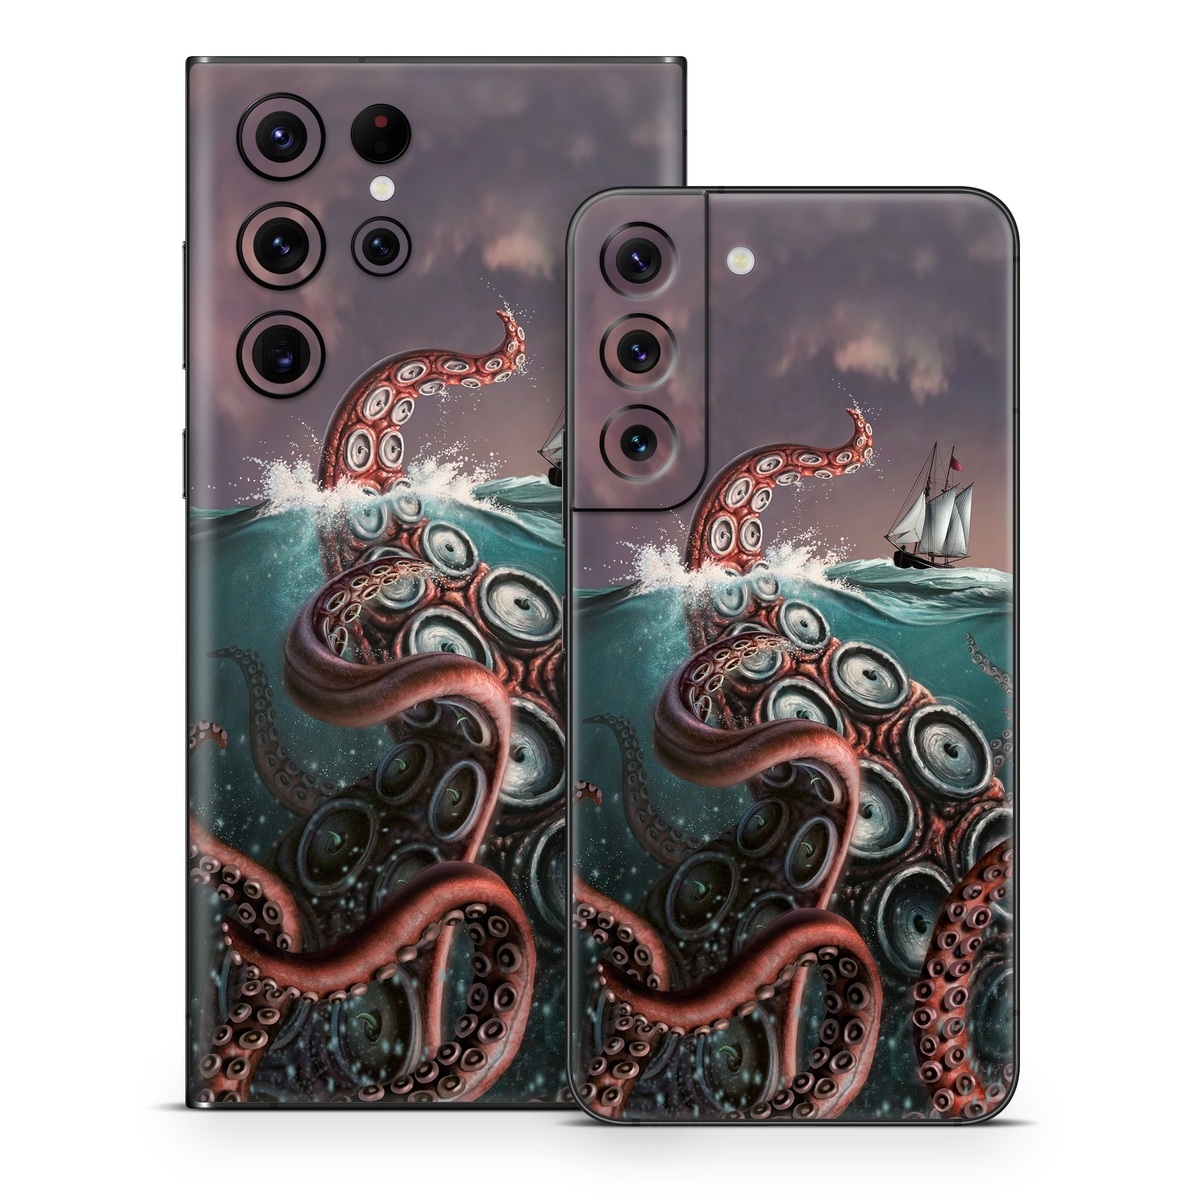  Skin design of Octopus, Water, Illustration, Wind wave, Sky, Graphic design, Organism, Cephalopod, Cg artwork, giant pacific octopus, with blue, gray, white, brown, red colors